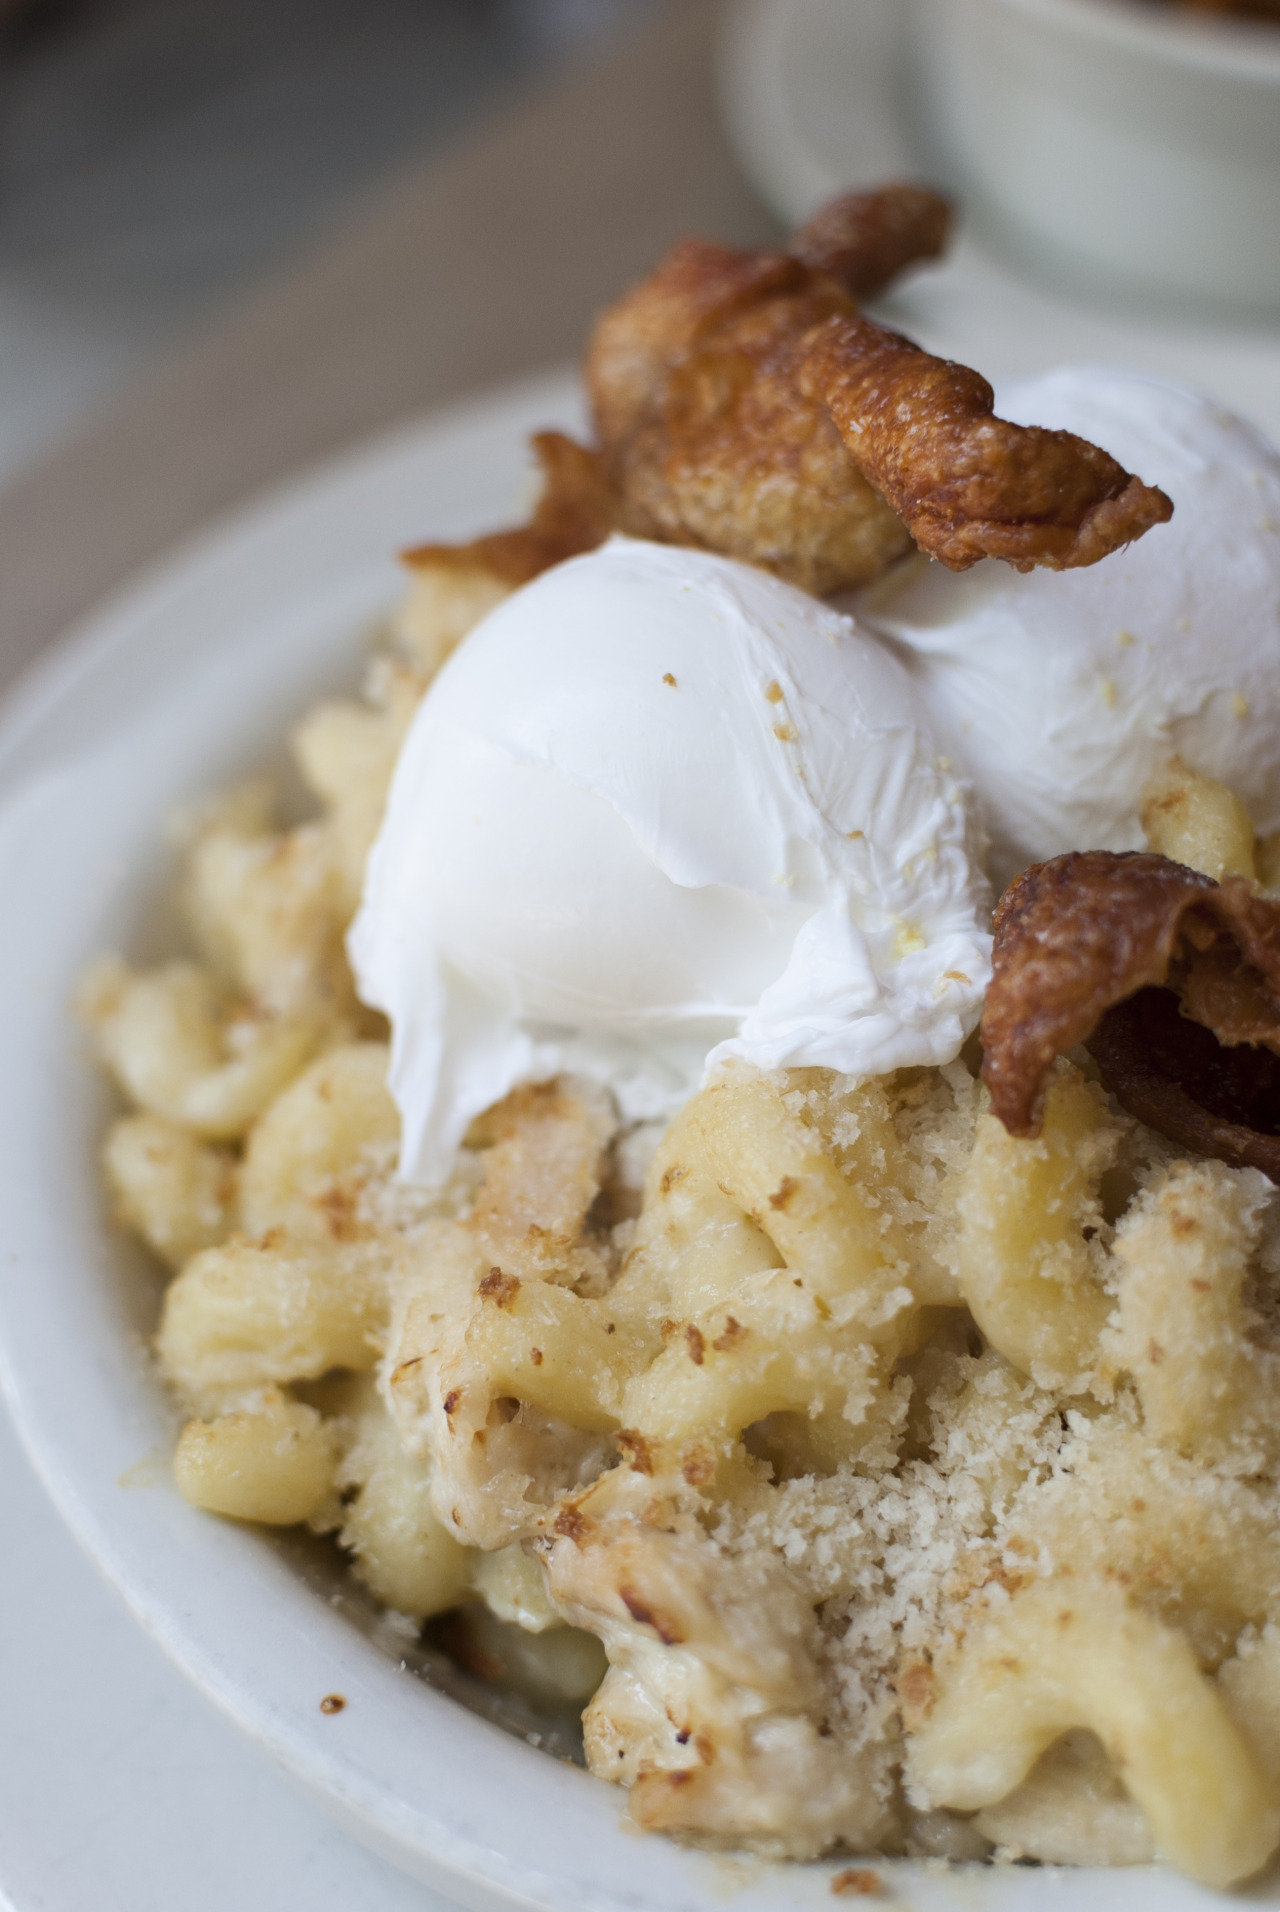 The Nose Dive Macaroni and Cheese: cavatappi pasta with white cheddar, hand-pulled chicken, poached eggs, and crispy chicken skin.
Personally, I like my mac and cheese creamier, baked into a dish like a cheesy, carby casserole. But the crispy chicken...